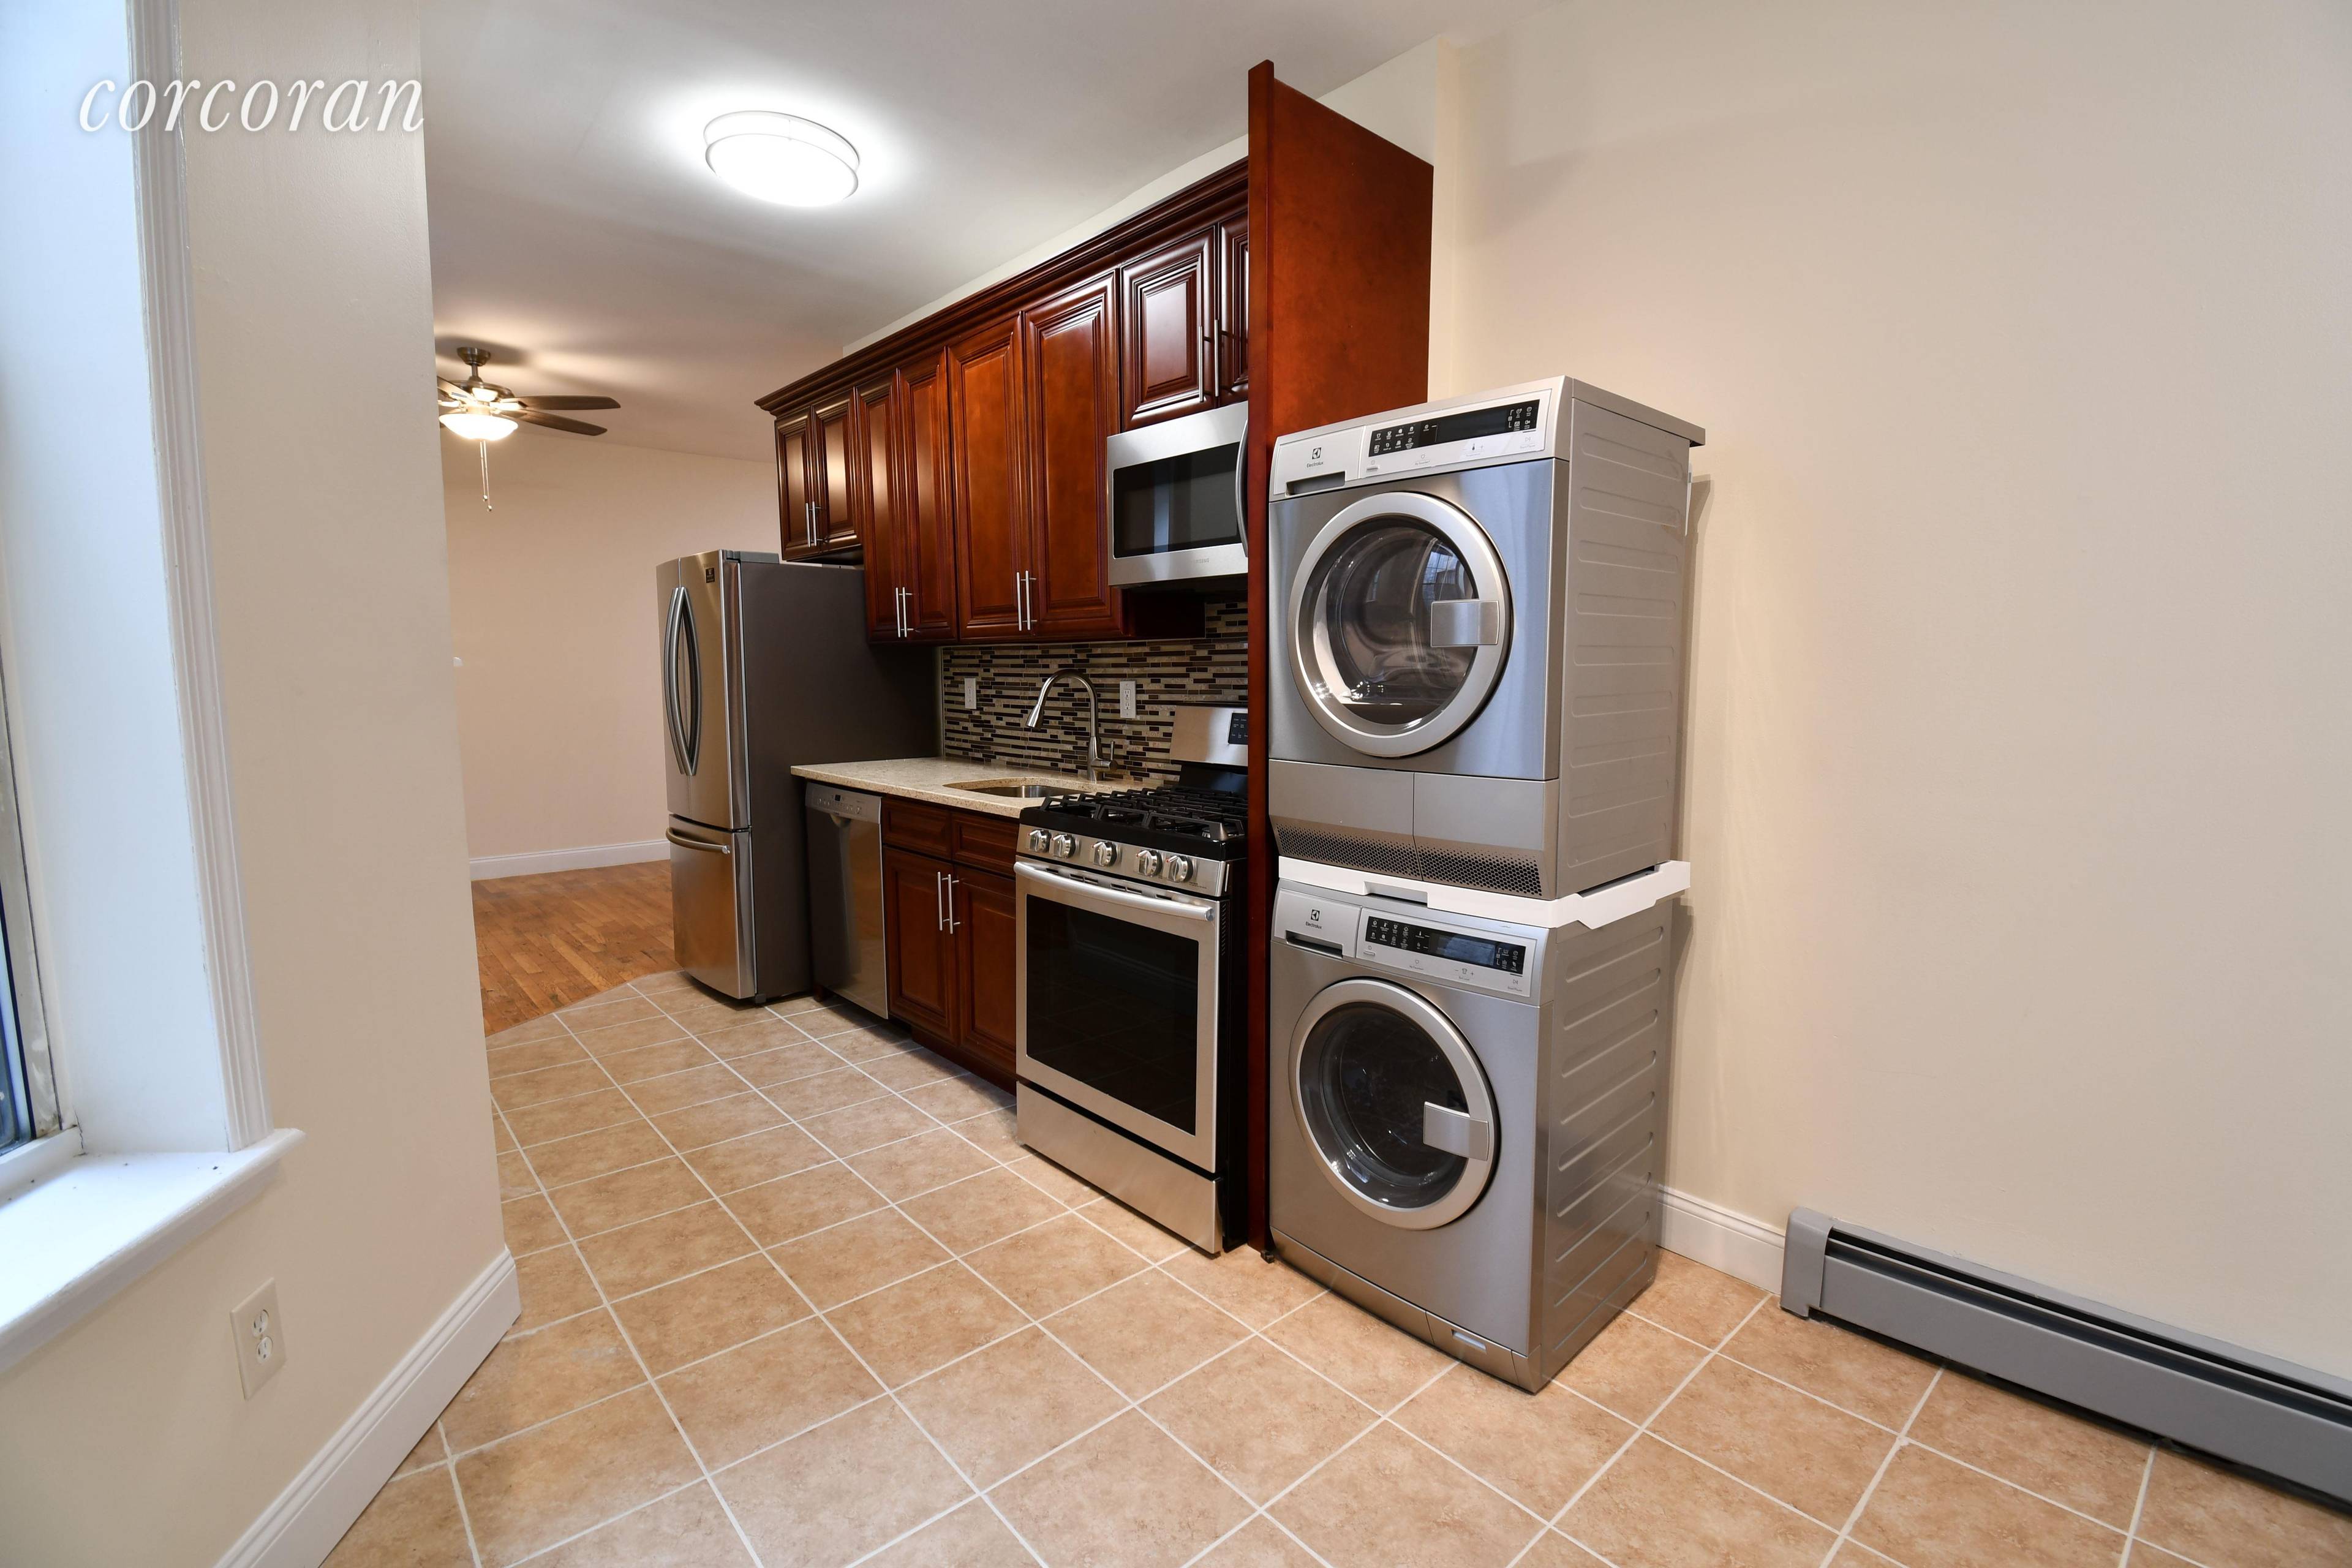 Welcome to this newly renovated Bed Stuy 3 bedroom 2 bathroom unit in a prime location.